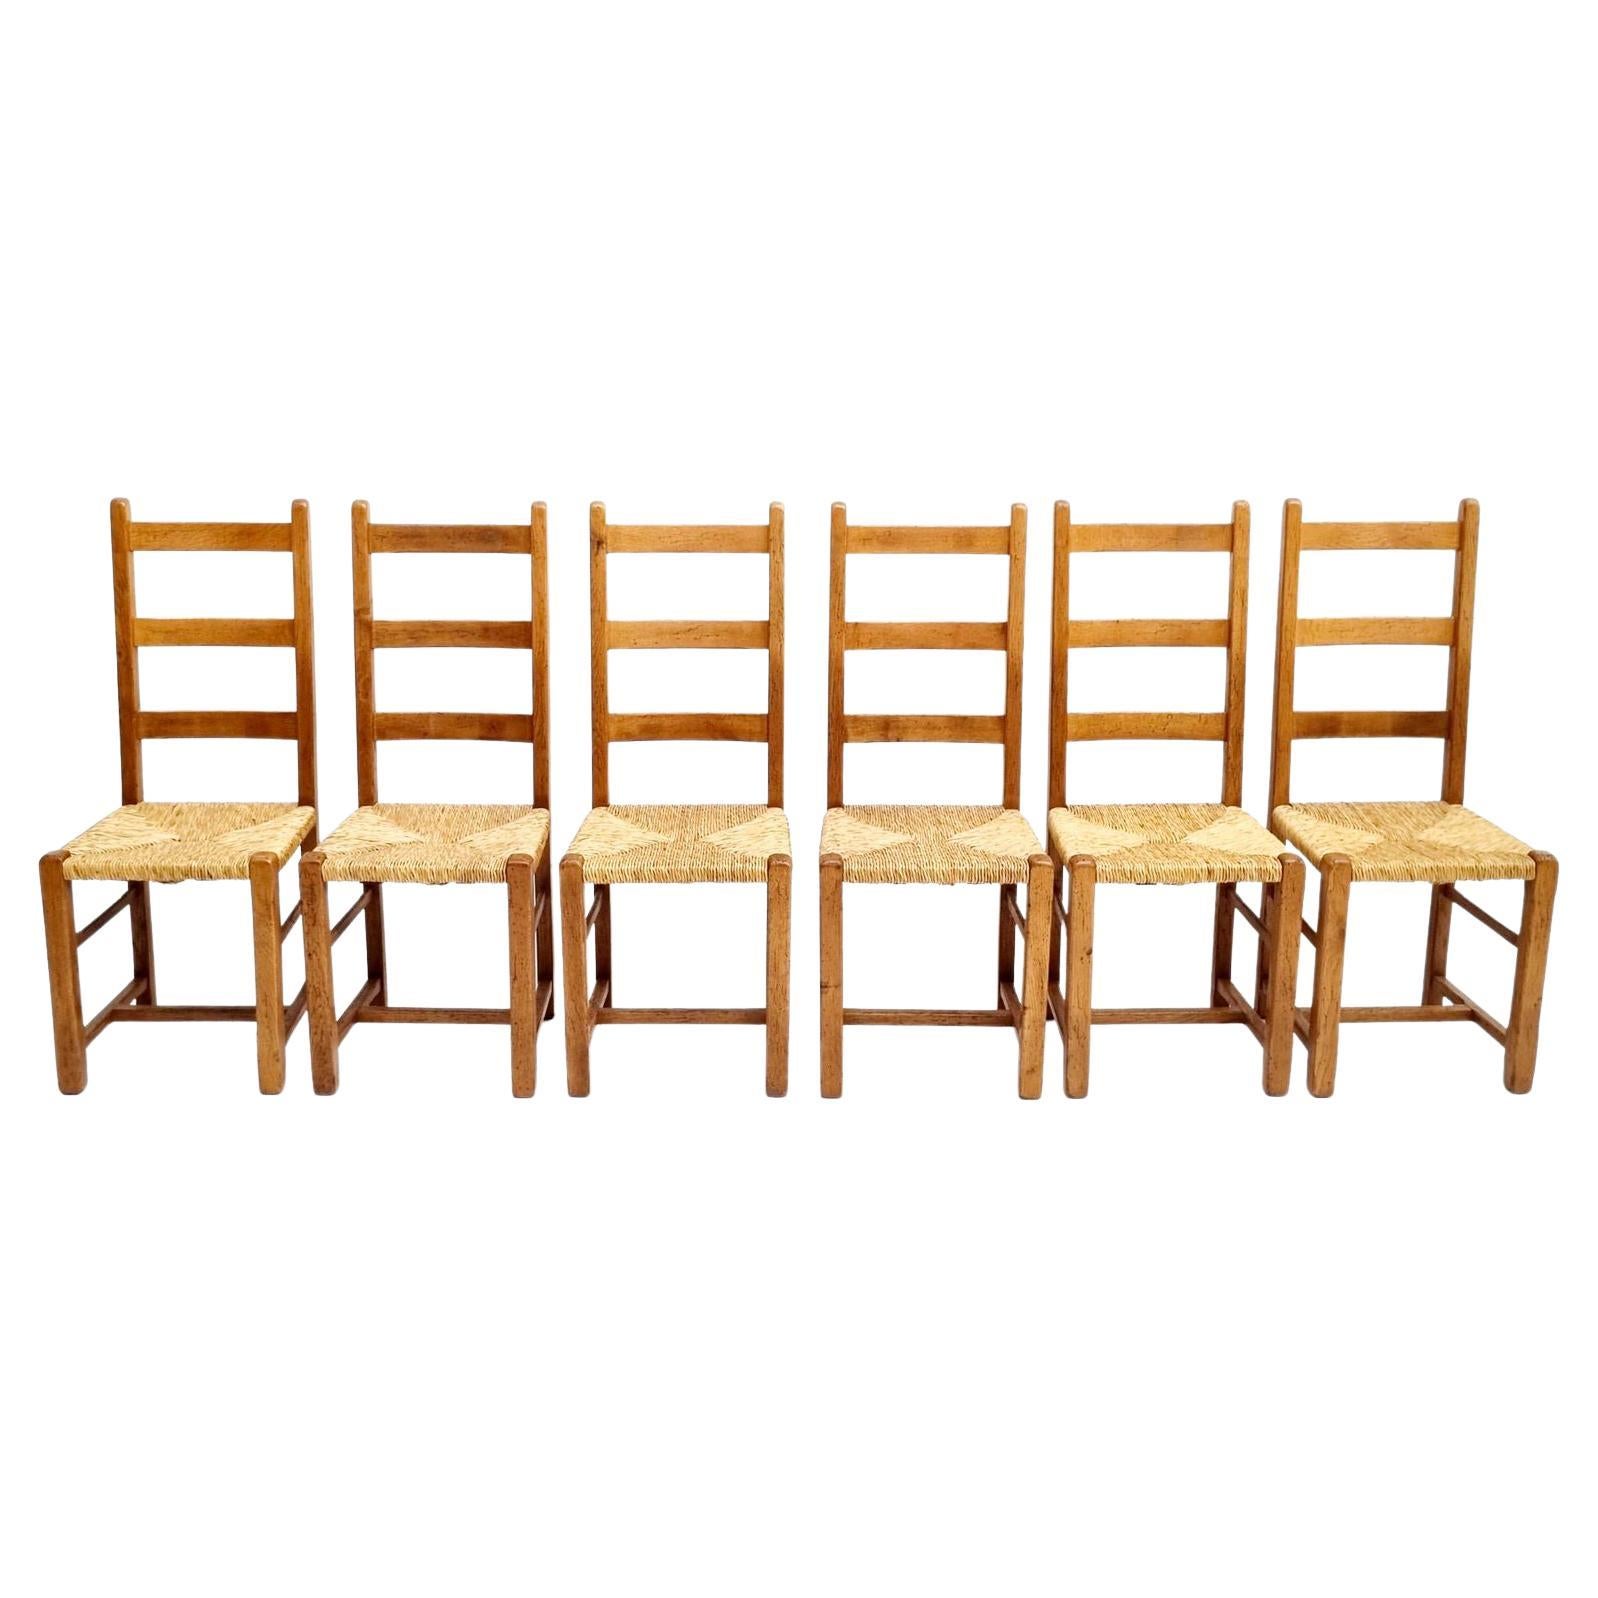 Brutalist Oak Antique Dining Chairs with Rush Seating, Set of 6, circa 1870s For Sale